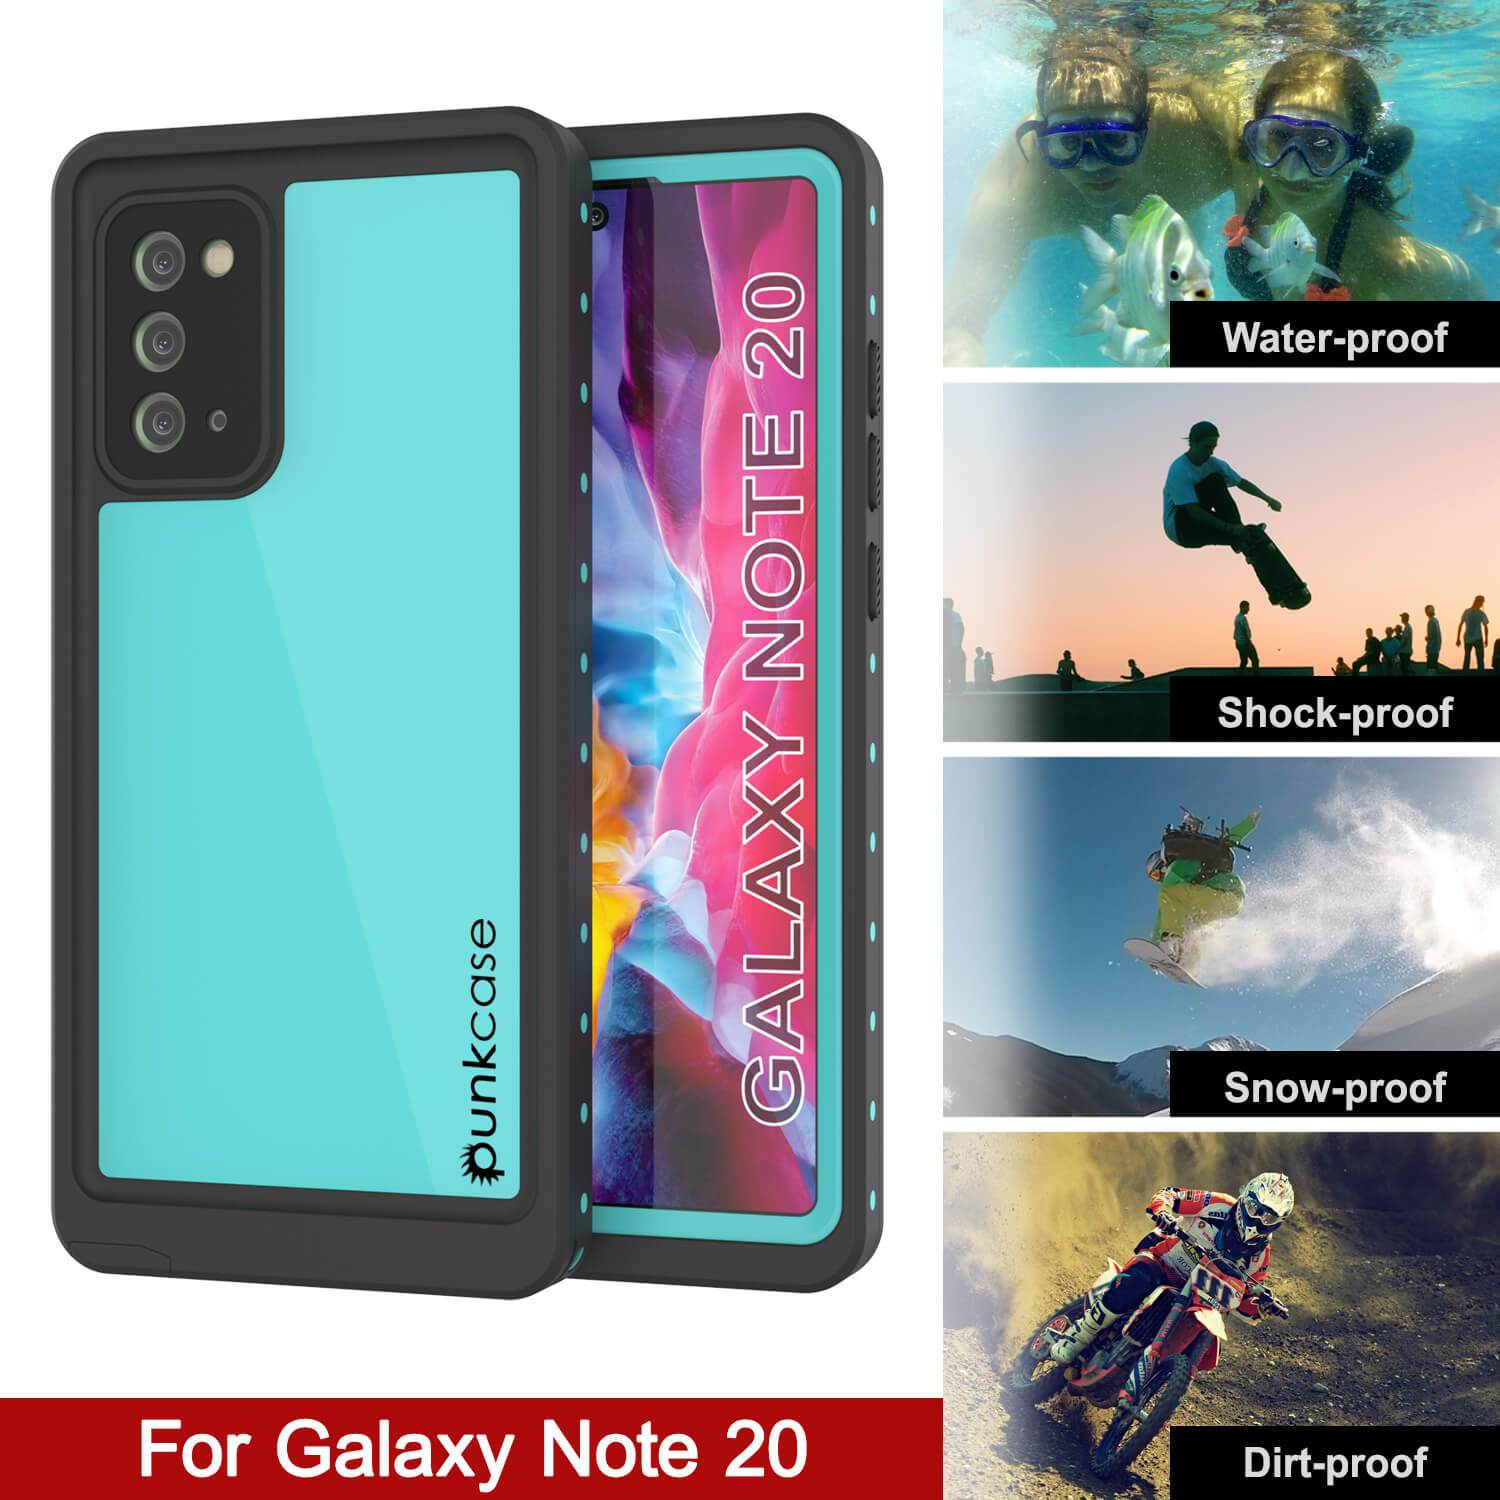 Galaxy Note 20 Waterproof Case, Punkcase Studstar Series Teal Thin Armor Cover